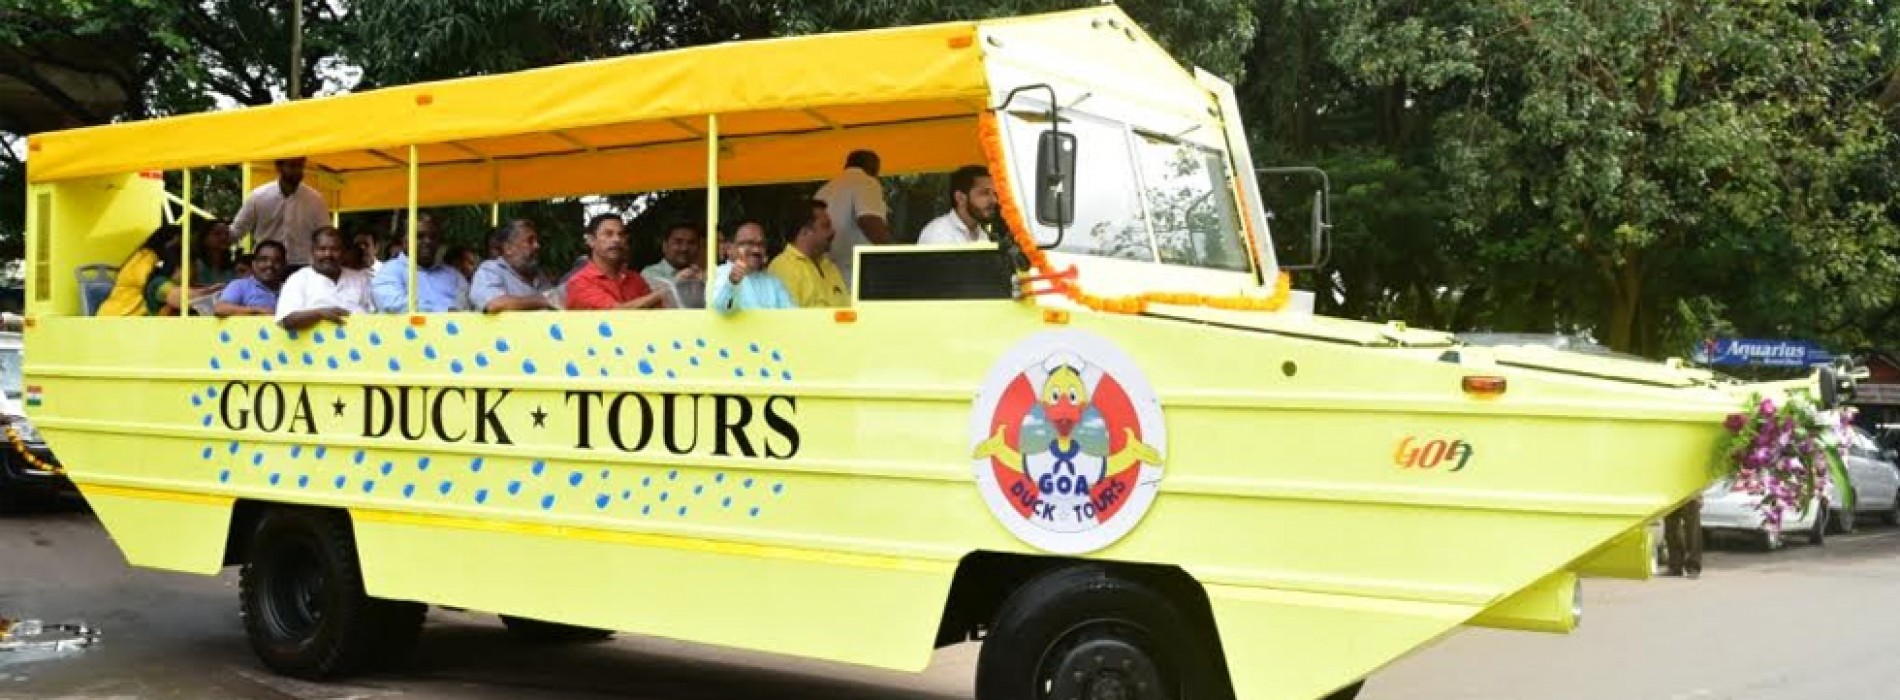 Goa first state to introduce Duck Boat Tours in India